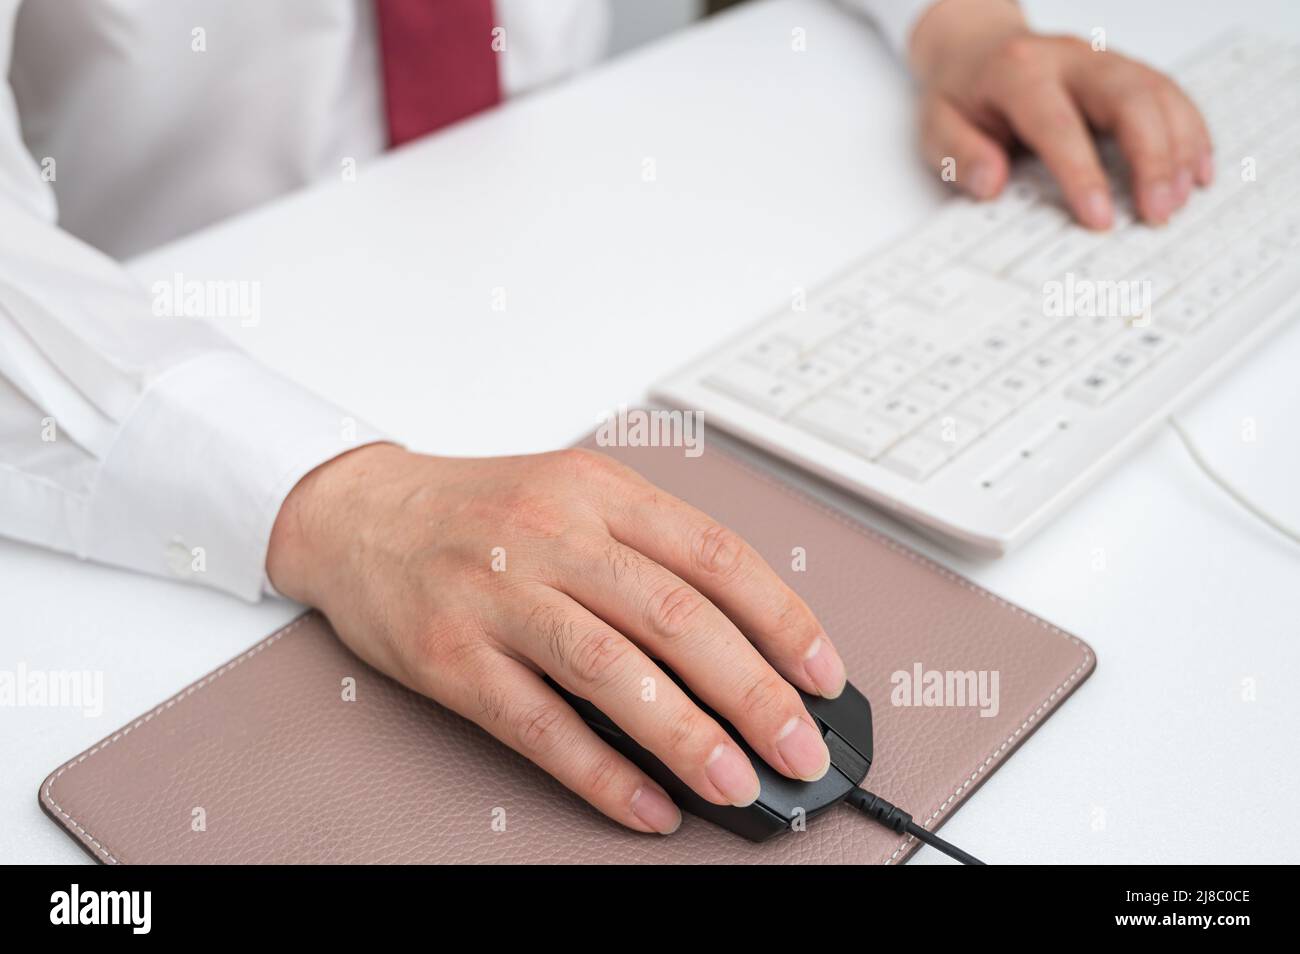 Hand of businessman holding computer mouse at office desk. Stock Photo